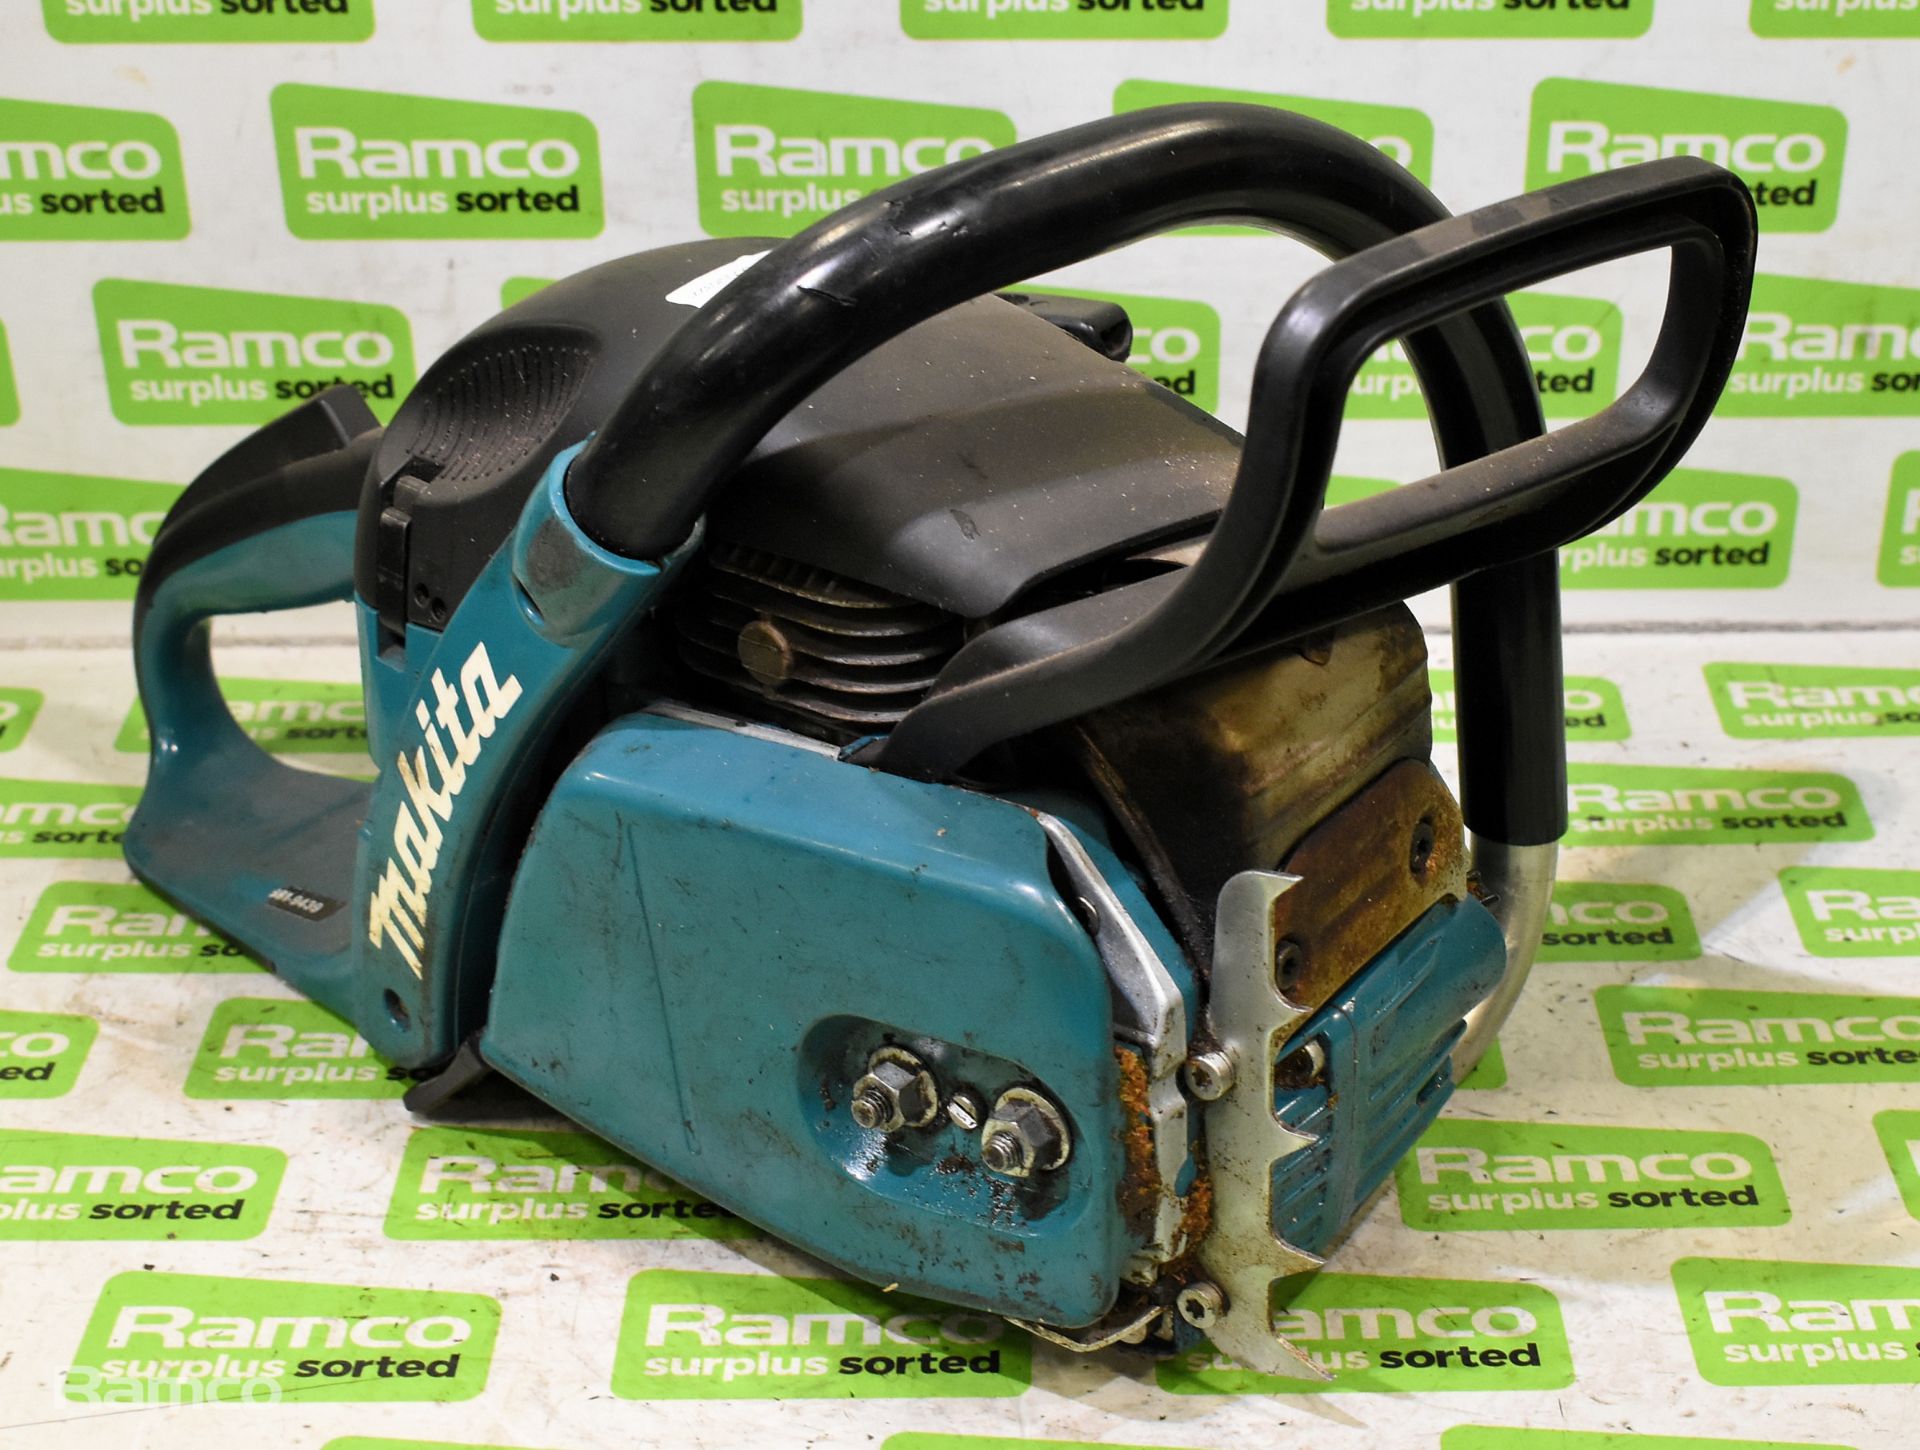 2x Makita DCS5030 50cc petrol chainsaw - BODIES ONLY - AS SPARES AND REPAIRS - Image 3 of 11